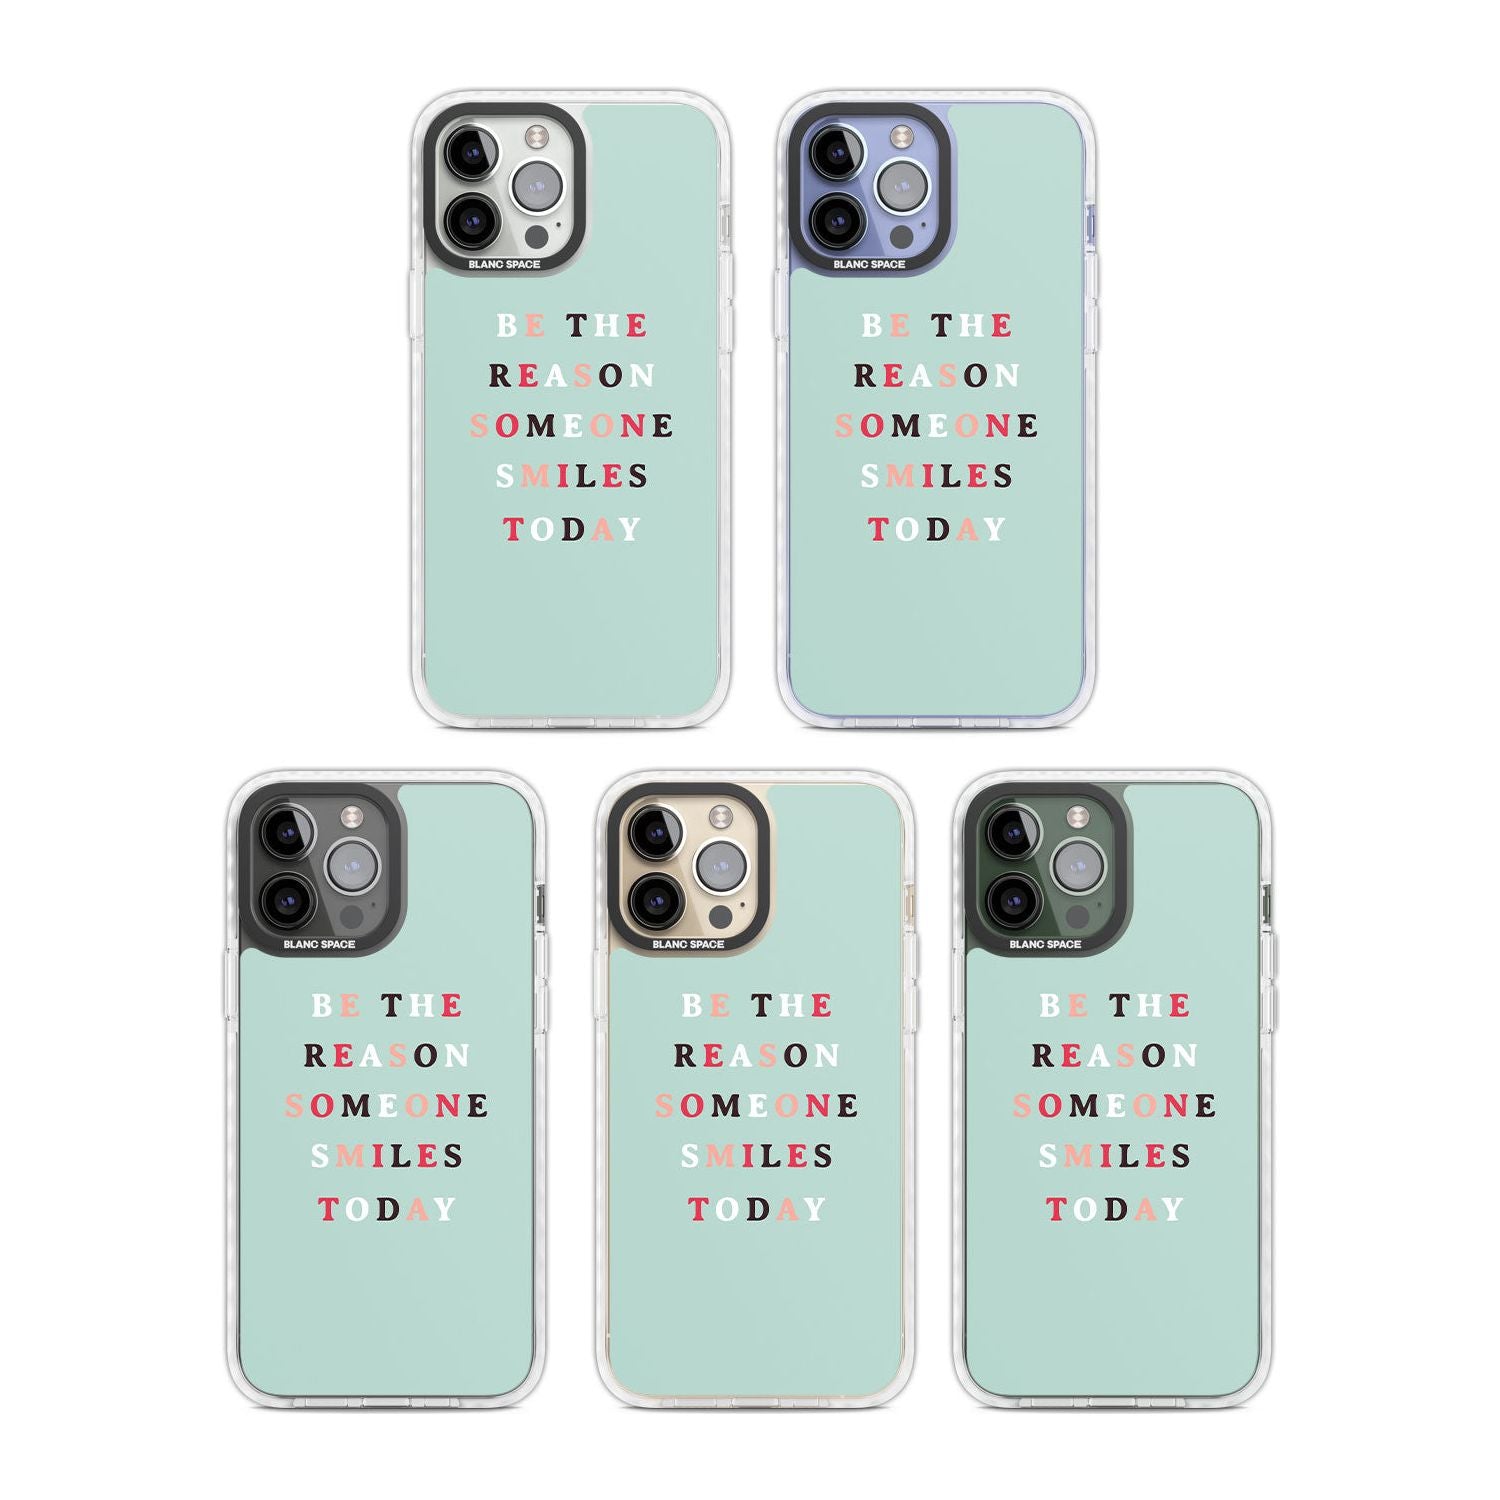 Be the reason someone smiles Phone Case iPhone 15 Pro Max / Black Impact Case,iPhone 15 Plus / Black Impact Case,iPhone 15 Pro / Black Impact Case,iPhone 15 / Black Impact Case,iPhone 15 Pro Max / Impact Case,iPhone 15 Plus / Impact Case,iPhone 15 Pro / Impact Case,iPhone 15 / Impact Case,iPhone 15 Pro Max / Magsafe Black Impact Case,iPhone 15 Plus / Magsafe Black Impact Case,iPhone 15 Pro / Magsafe Black Impact Case,iPhone 15 / Magsafe Black Impact Case,iPhone 14 Pro Max / Black Impact Case,iPhone 14 Plus 